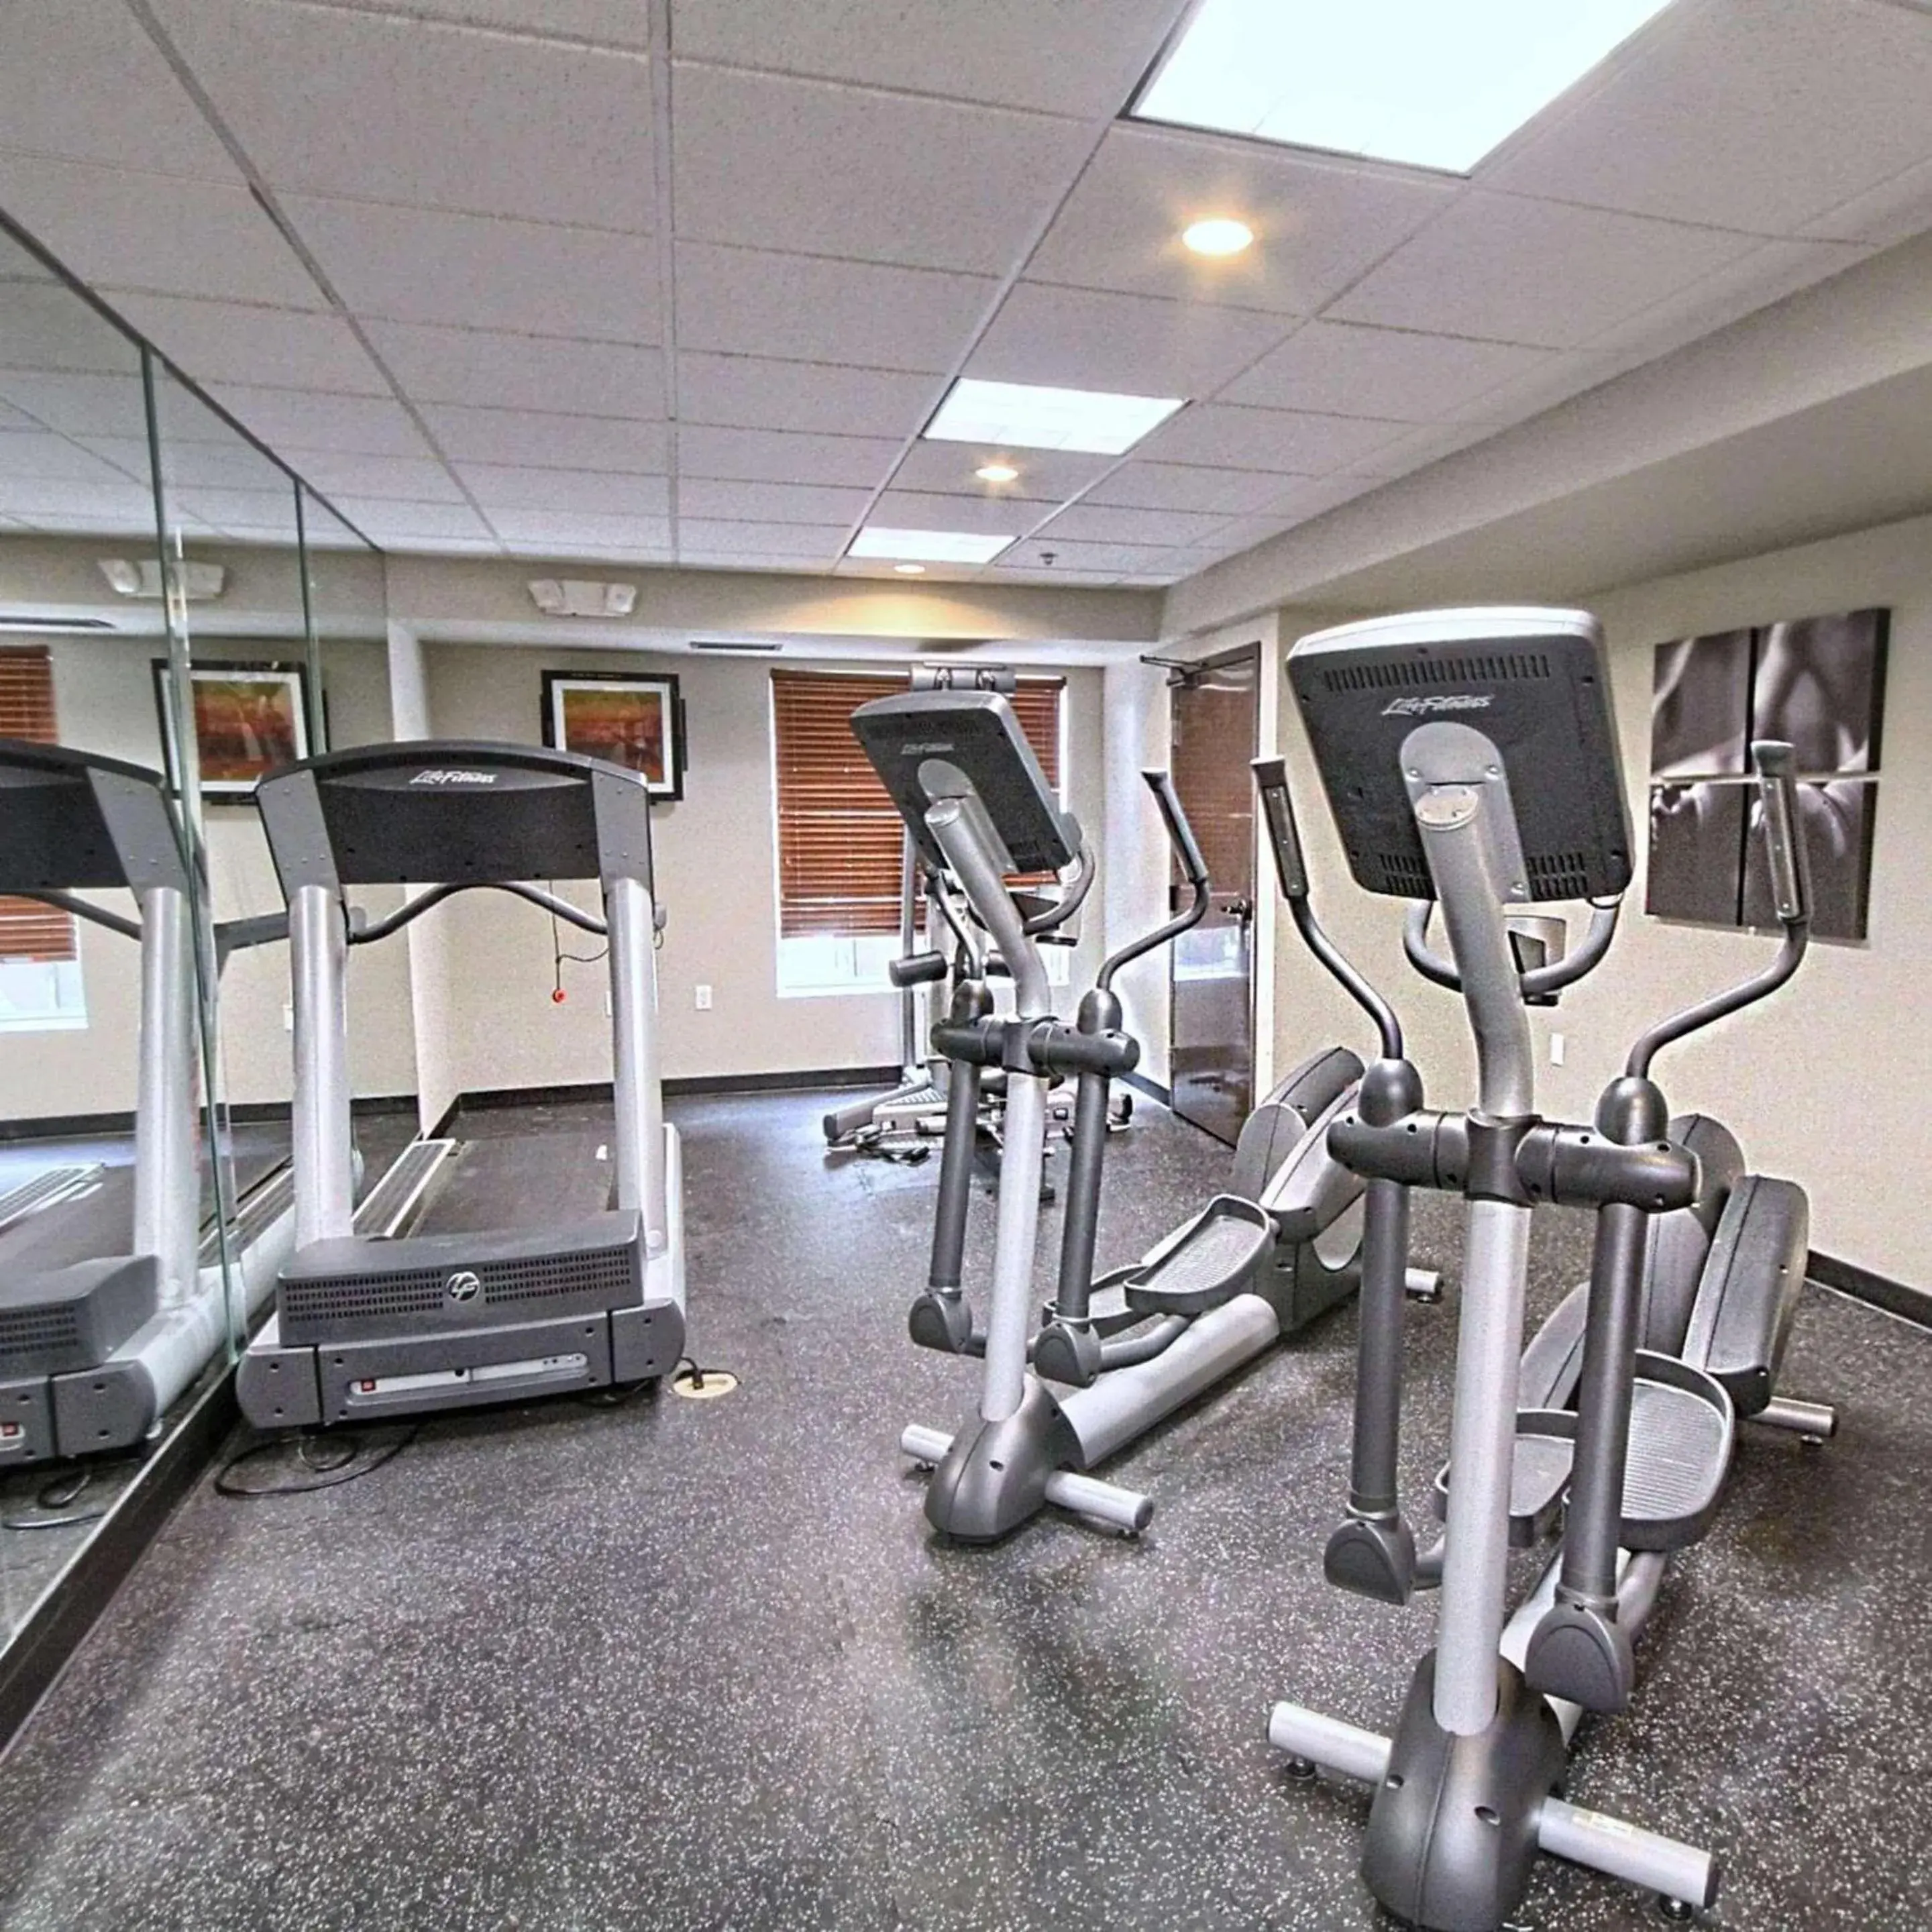 Fitness centre/facilities, Fitness Center/Facilities in Country Inn & Suites by Radisson, Dearborn, MI